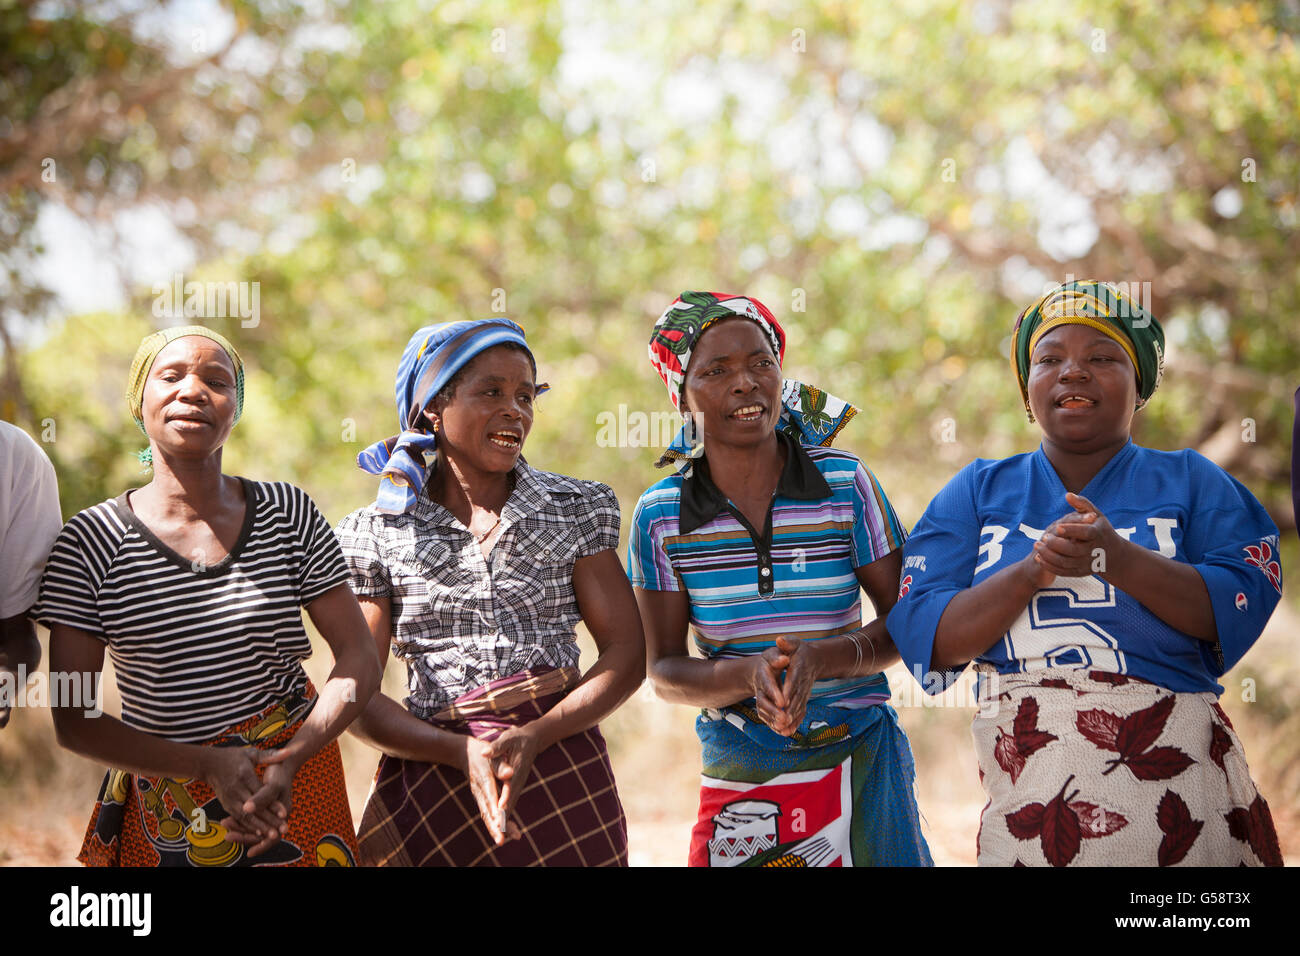 A Group Of Women Sing Together In Nampula Province Mozambique Stock Photo Alamy